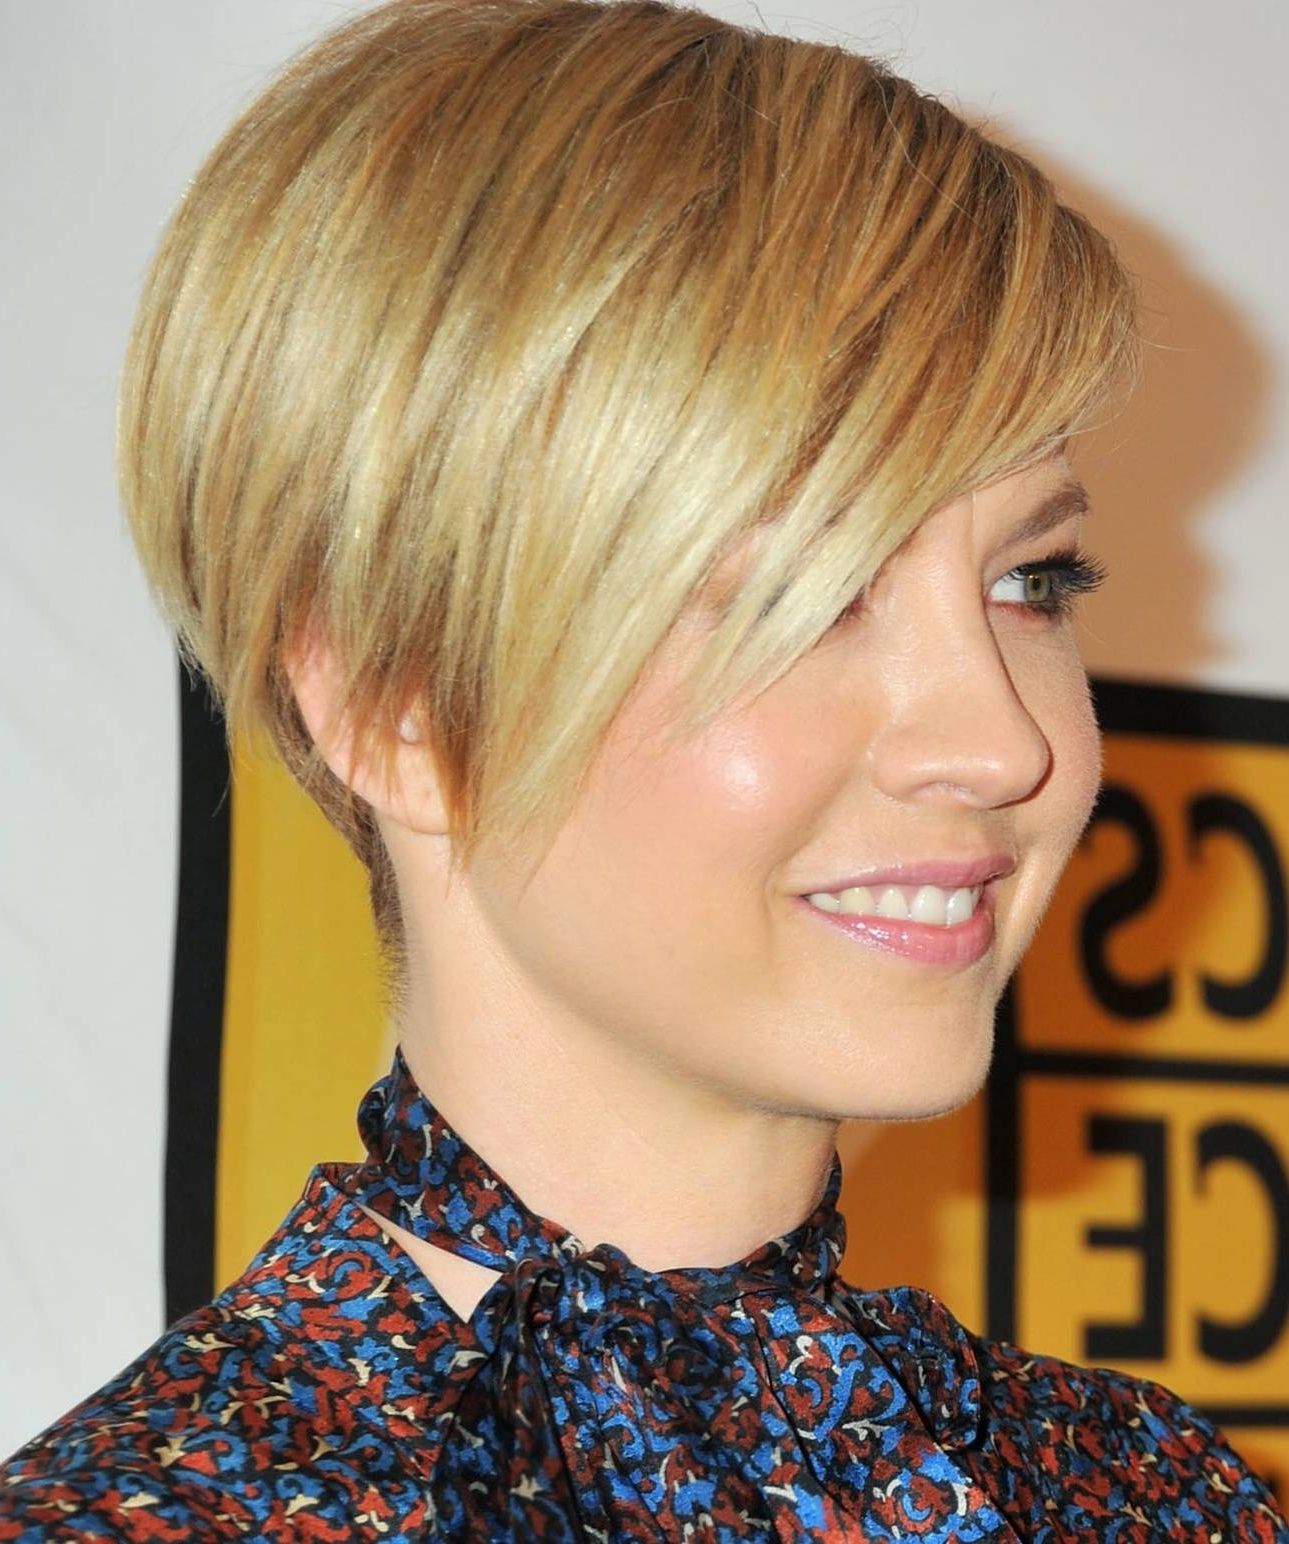 Inverted Bob Short Hairstyles – 28 Easy To Style Haircut Ideas In Widely Used Blonde Pixie Hairstyles With Short Angled Layers (Gallery 19 of 20)